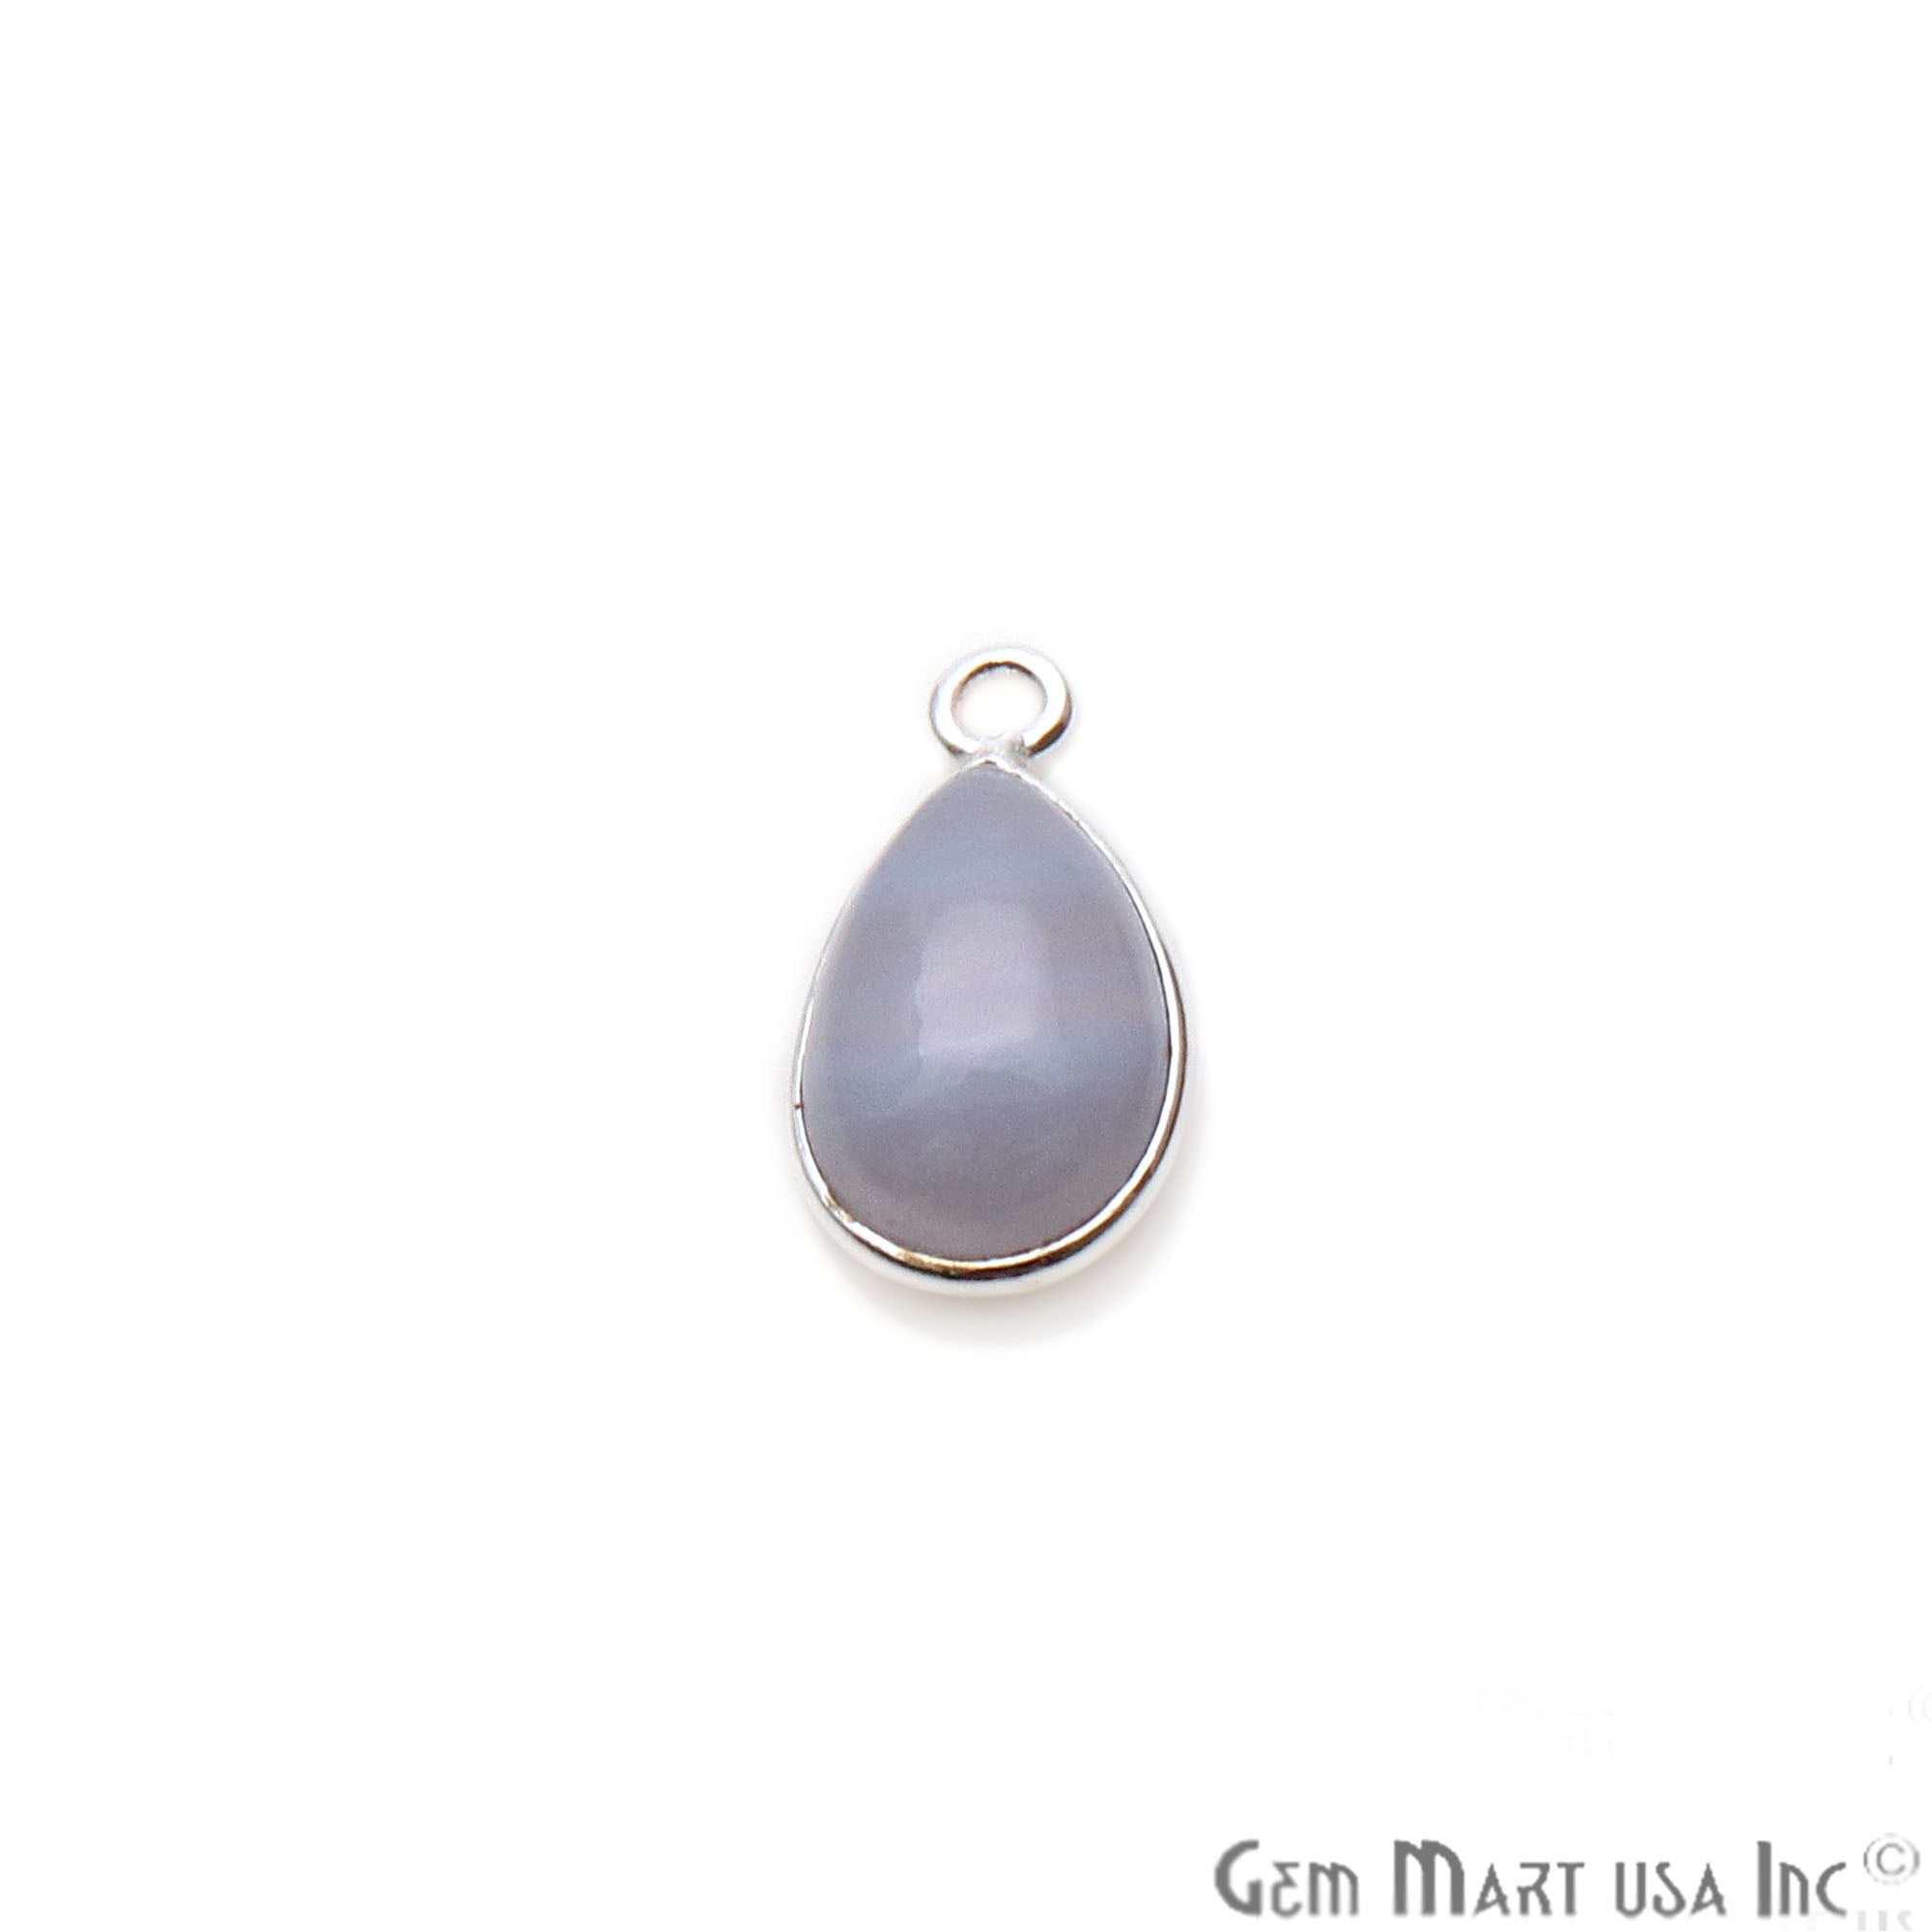 Blue Lace Agate Pears 8x12mm Single Silver Plated Gemstone Cabochon Connector - GemMartUSA